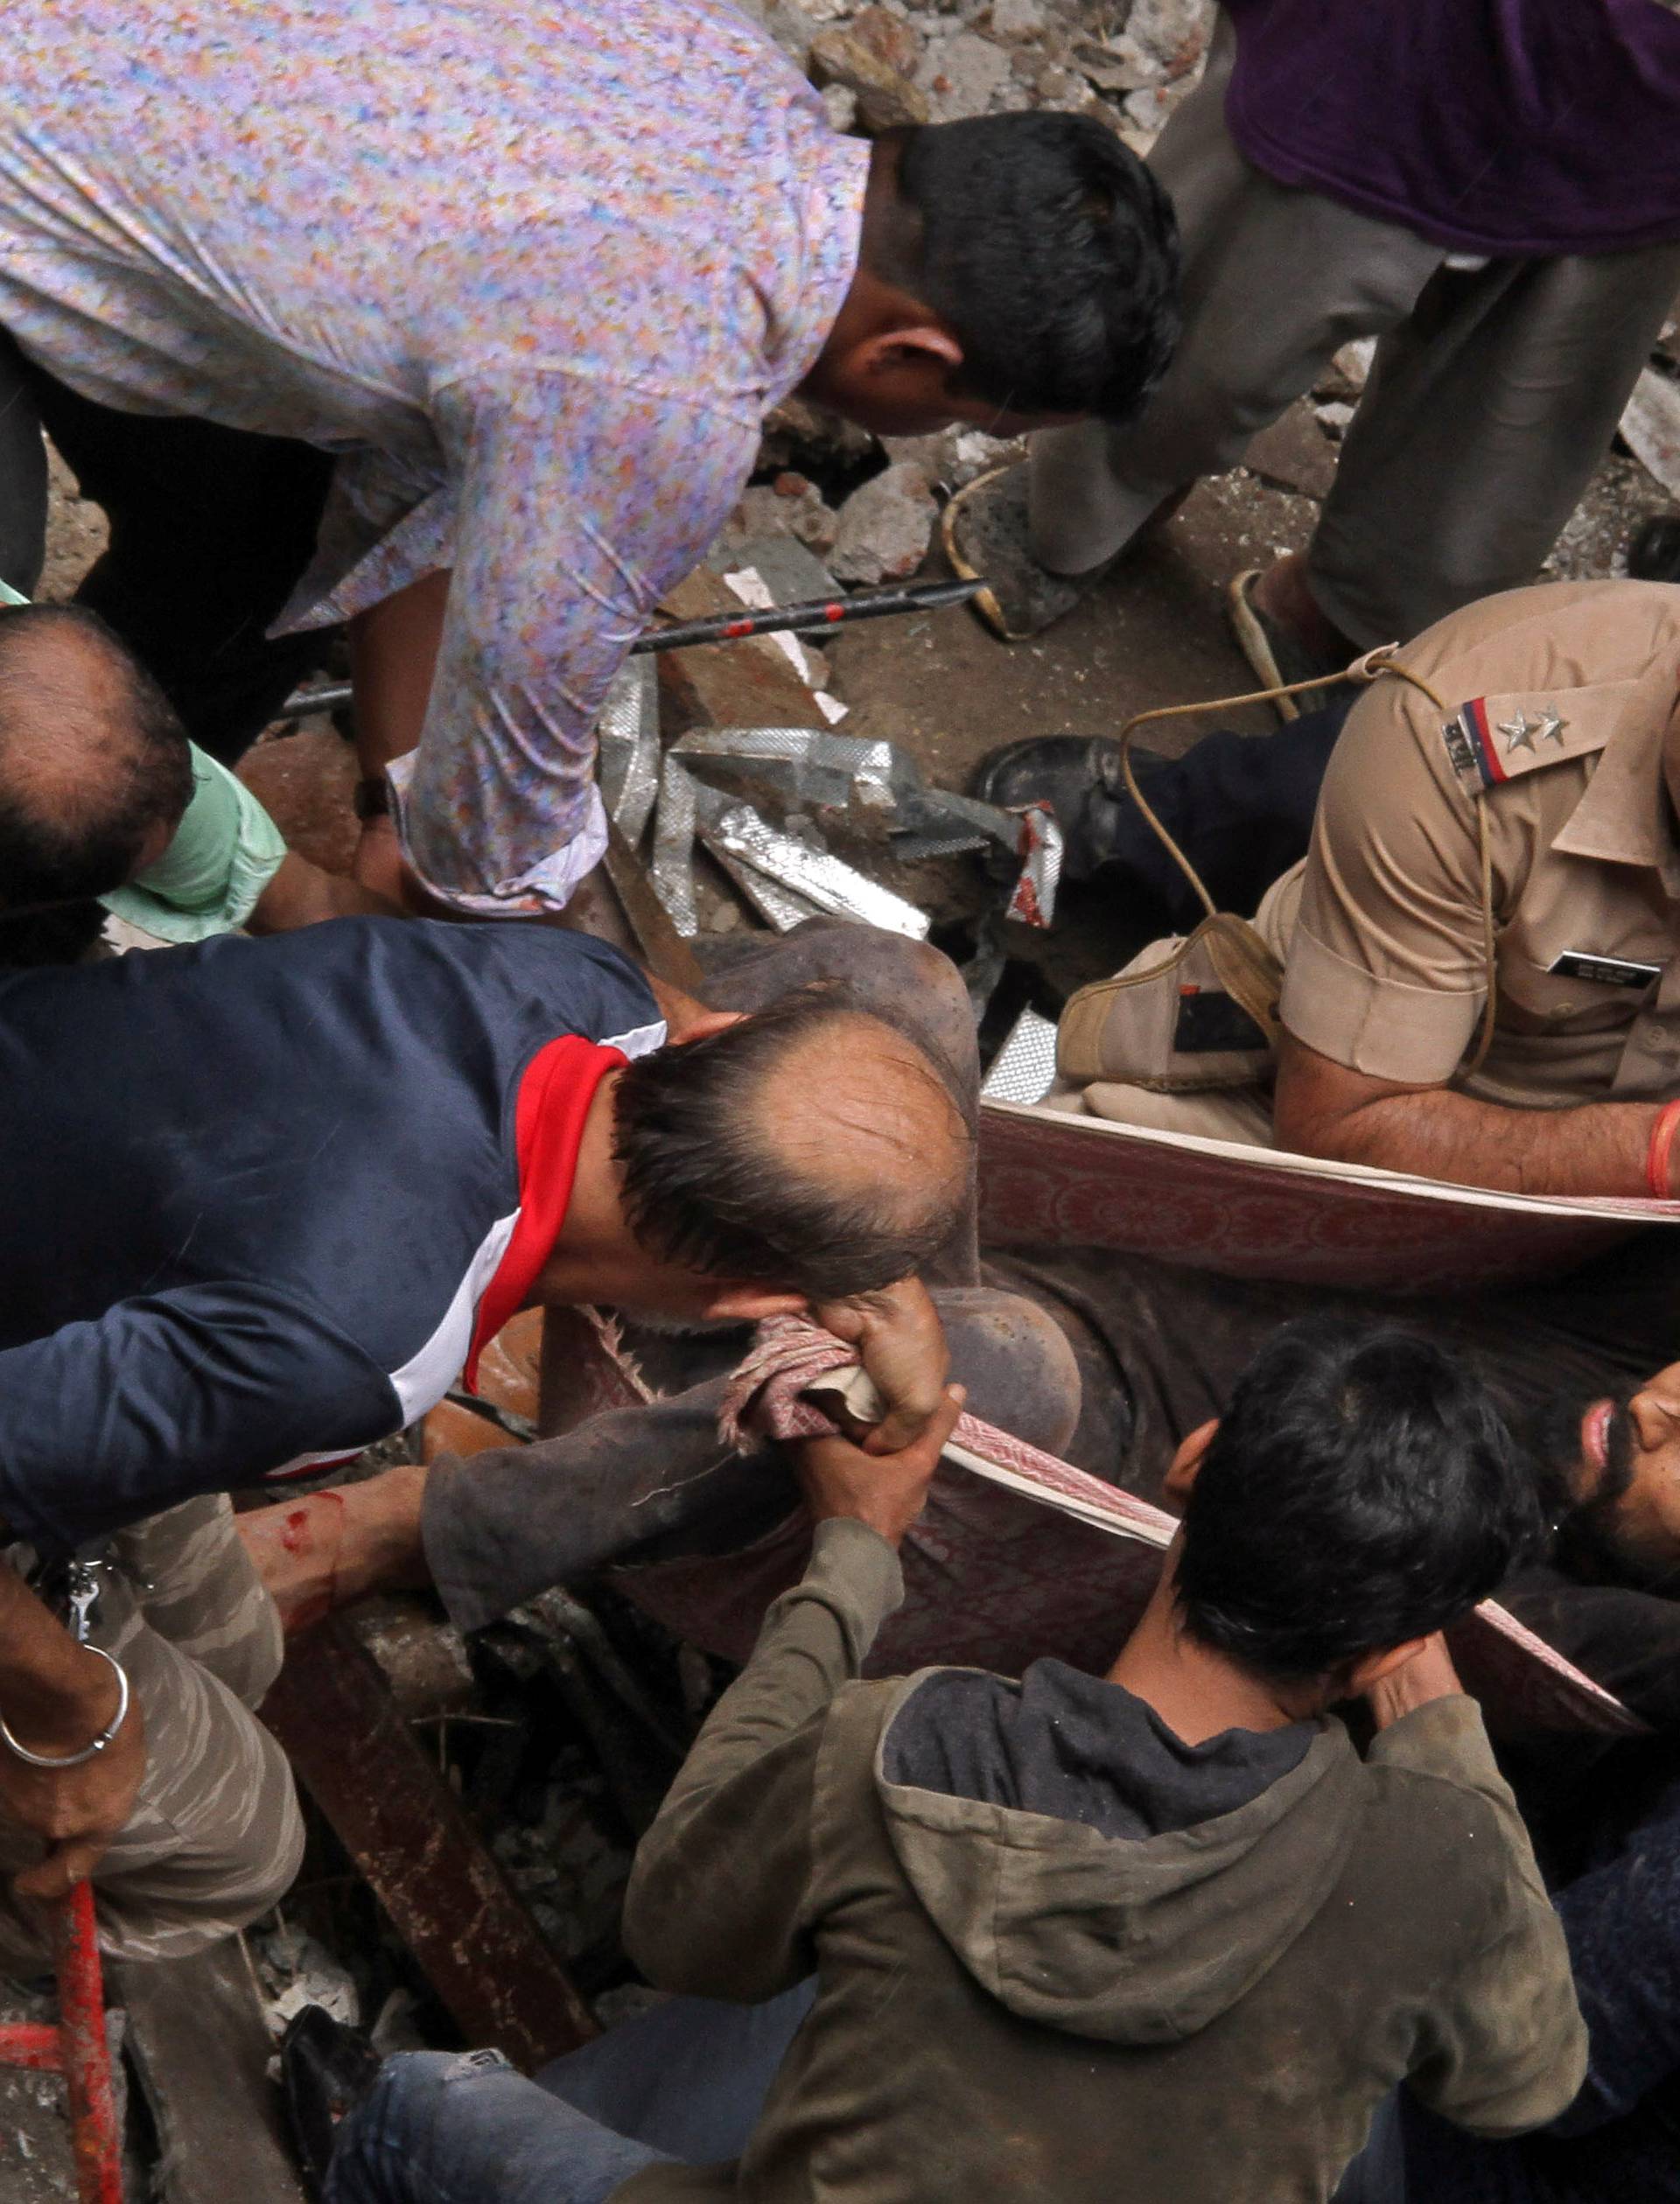 Rescue workers carry a man who was rescued from the rubble at the site of a collapsed building in Mumbai